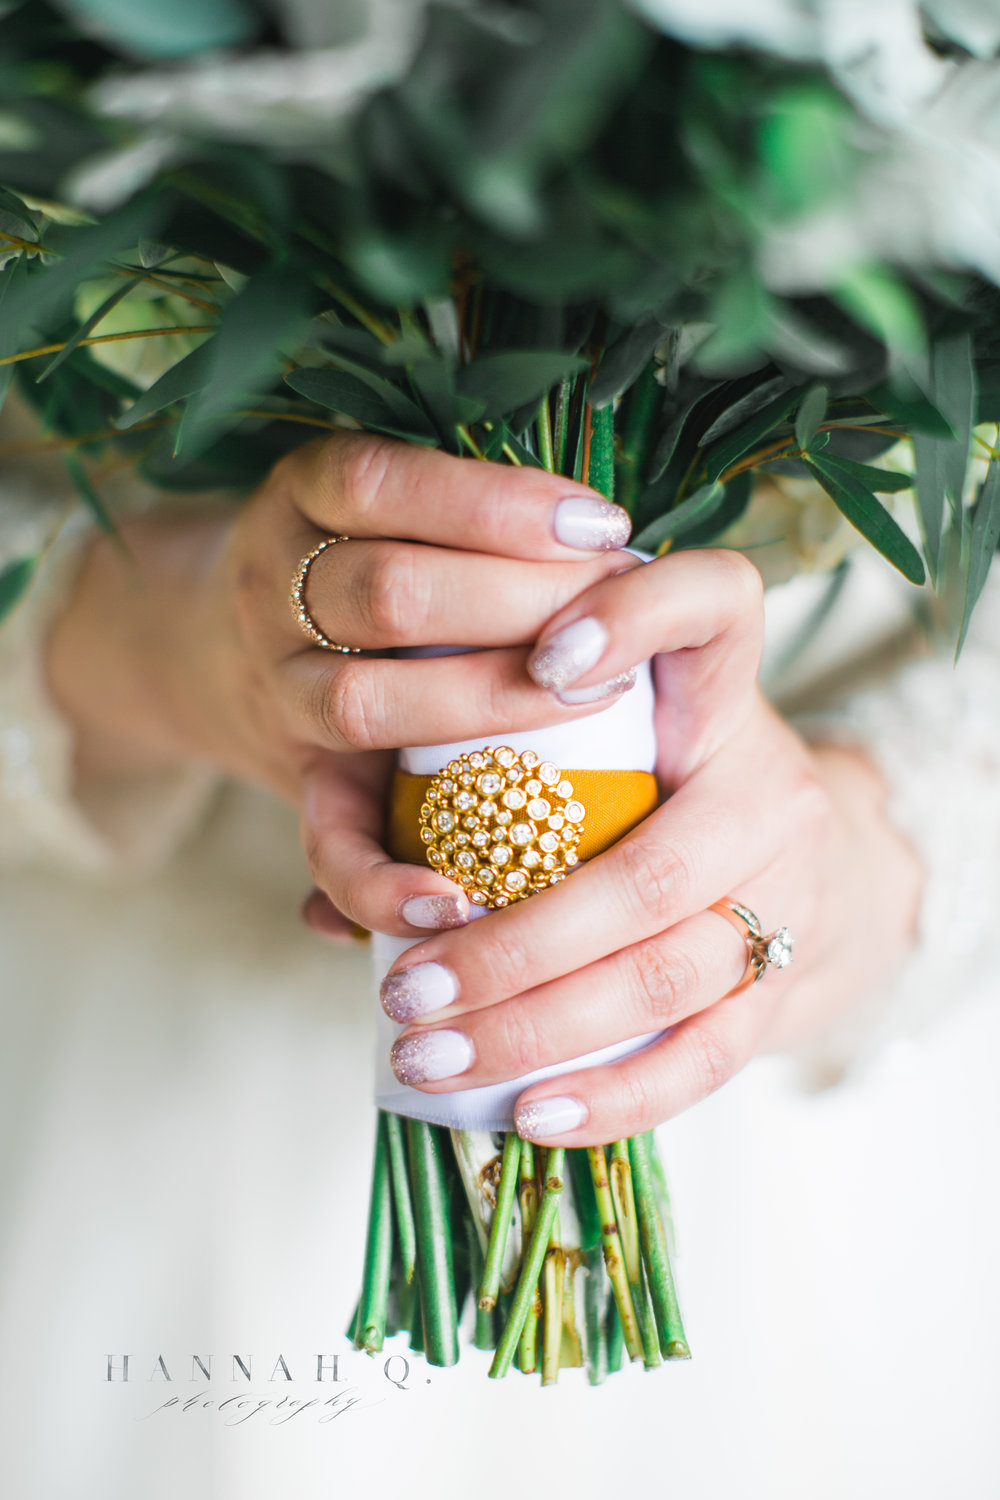 This thoughtful bride also tied her grandmother's earring to her bouquet.&nbsp;